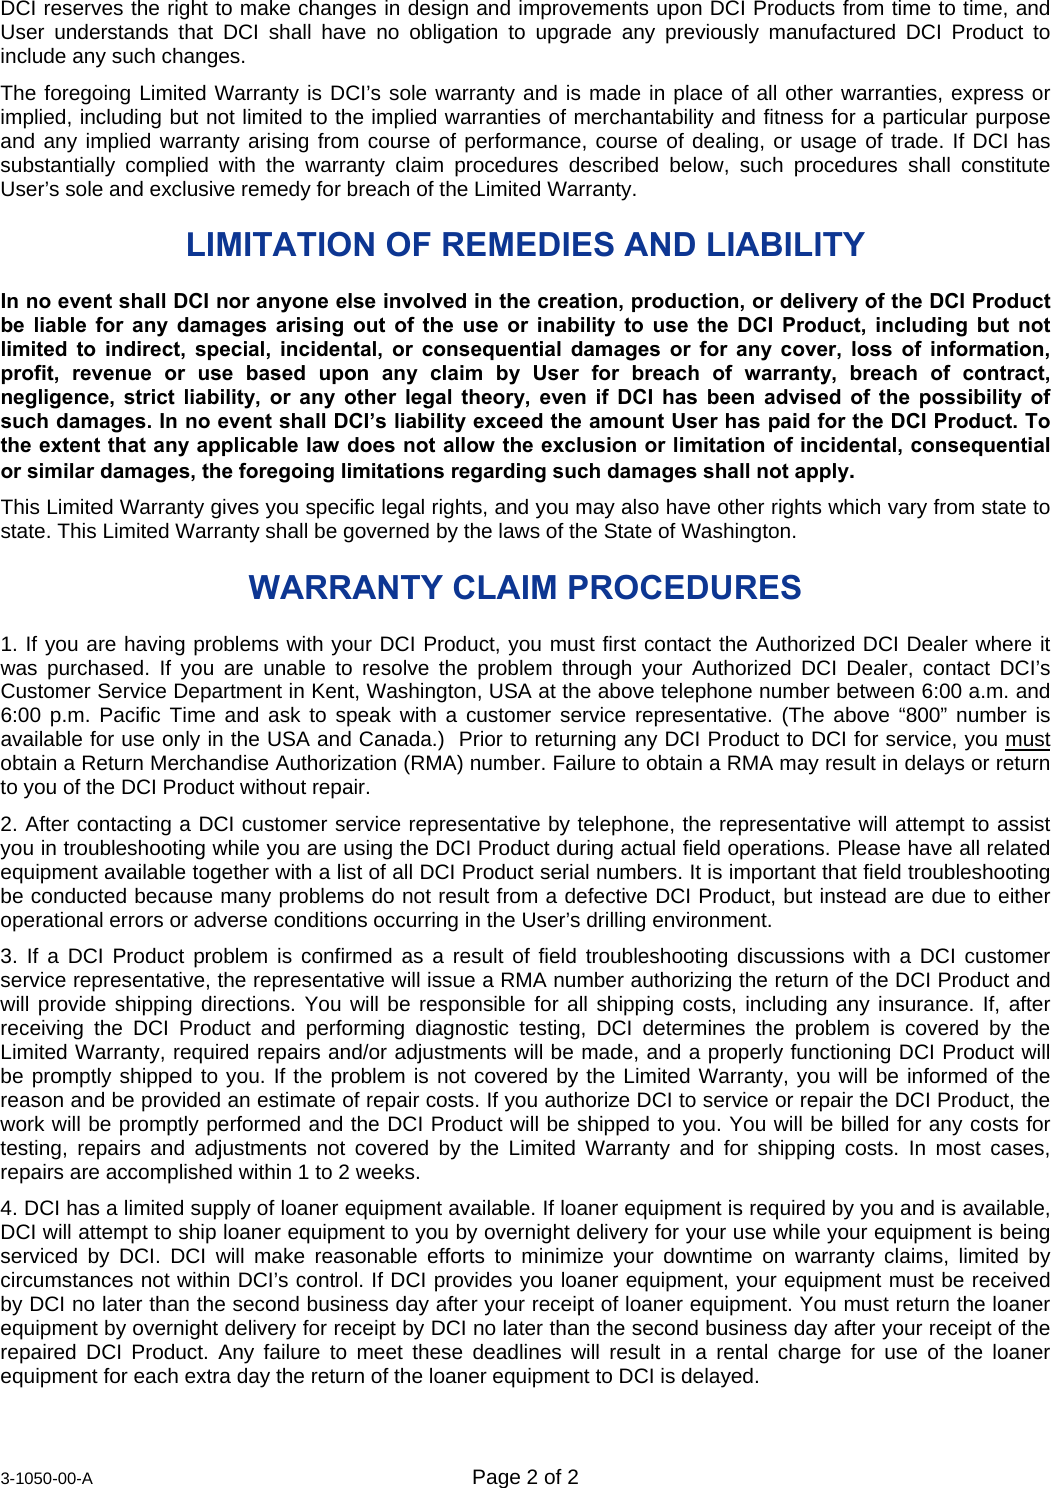  3-1050-00-A  Page 2 of 2   DCI reserves the right to make changes in design and improvements upon DCI Products from time to time, and User understands that DCI shall have no obligation to upgrade any previously manufactured DCI Product to include any such changes. The foregoing Limited Warranty is DCI’s sole warranty and is made in place of all other warranties, express or implied, including but not limited to the implied warranties of merchantability and fitness for a particular purpose and any implied warranty arising from course of performance, course of dealing, or usage of trade. If DCI has substantially complied with the warranty claim procedures described below, such procedures shall constitute User’s sole and exclusive remedy for breach of the Limited Warranty. LIMITATION OF REMEDIES AND LIABILITY  In no event shall DCI nor anyone else involved in the creation, production, or delivery of the DCI Product be liable for any damages arising out of the use or inability to use the DCI Product, including but not limited to indirect, special, incidental, or consequential damages or for any cover, loss of information, profit, revenue or use based upon any claim by User for breach of warranty, breach of contract, negligence, strict liability, or any other legal theory, even if DCI has been advised of the possibility of such damages. In no event shall DCI’s liability exceed the amount User has paid for the DCI Product. To the extent that any applicable law does not allow the exclusion or limitation of incidental, consequential or similar damages, the foregoing limitations regarding such damages shall not apply. This Limited Warranty gives you specific legal rights, and you may also have other rights which vary from state to state. This Limited Warranty shall be governed by the laws of the State of Washington. WARRANTY CLAIM PROCEDURES 1. If you are having problems with your DCI Product, you must first contact the Authorized DCI Dealer where it was purchased. If you are unable to resolve the problem through your Authorized DCI Dealer, contact DCI’s Customer Service Department in Kent, Washington, USA at the above telephone number between 6:00 a.m. and 6:00 p.m. Pacific Time and ask to speak with a customer service representative. (The above “800” number is available for use only in the USA and Canada.)  Prior to returning any DCI Product to DCI for service, you must obtain a Return Merchandise Authorization (RMA) number. Failure to obtain a RMA may result in delays or return to you of the DCI Product without repair. 2. After contacting a DCI customer service representative by telephone, the representative will attempt to assist you in troubleshooting while you are using the DCI Product during actual field operations. Please have all related equipment available together with a list of all DCI Product serial numbers. It is important that field troubleshooting be conducted because many problems do not result from a defective DCI Product, but instead are due to either operational errors or adverse conditions occurring in the User’s drilling environment. 3. If a DCI Product problem is confirmed as a result of field troubleshooting discussions with a DCI customer service representative, the representative will issue a RMA number authorizing the return of the DCI Product and will provide shipping directions. You will be responsible for all shipping costs, including any insurance. If, after receiving the DCI Product and performing diagnostic testing, DCI determines the problem is covered by the Limited Warranty, required repairs and/or adjustments will be made, and a properly functioning DCI Product will be promptly shipped to you. If the problem is not covered by the Limited Warranty, you will be informed of the reason and be provided an estimate of repair costs. If you authorize DCI to service or repair the DCI Product, the work will be promptly performed and the DCI Product will be shipped to you. You will be billed for any costs for testing, repairs and adjustments not covered by the Limited Warranty and for shipping costs. In most cases, repairs are accomplished within 1 to 2 weeks. 4. DCI has a limited supply of loaner equipment available. If loaner equipment is required by you and is available, DCI will attempt to ship loaner equipment to you by overnight delivery for your use while your equipment is being serviced by DCI. DCI will make reasonable efforts to minimize your downtime on warranty claims, limited by circumstances not within DCI’s control. If DCI provides you loaner equipment, your equipment must be received by DCI no later than the second business day after your receipt of loaner equipment. You must return the loaner equipment by overnight delivery for receipt by DCI no later than the second business day after your receipt of the repaired DCI Product. Any failure to meet these deadlines will result in a rental charge for use of the loaner equipment for each extra day the return of the loaner equipment to DCI is delayed. 